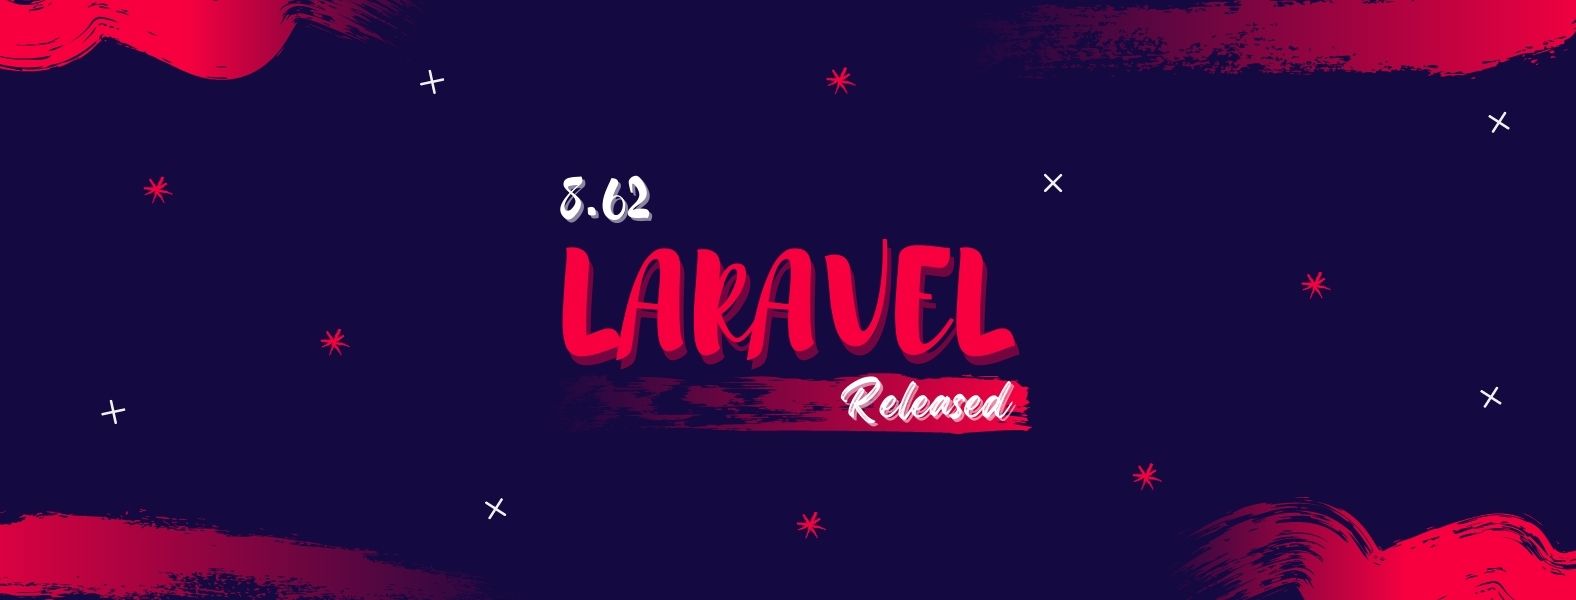 Laravel 8.62 Released - Analysis of Features And Updates cover image